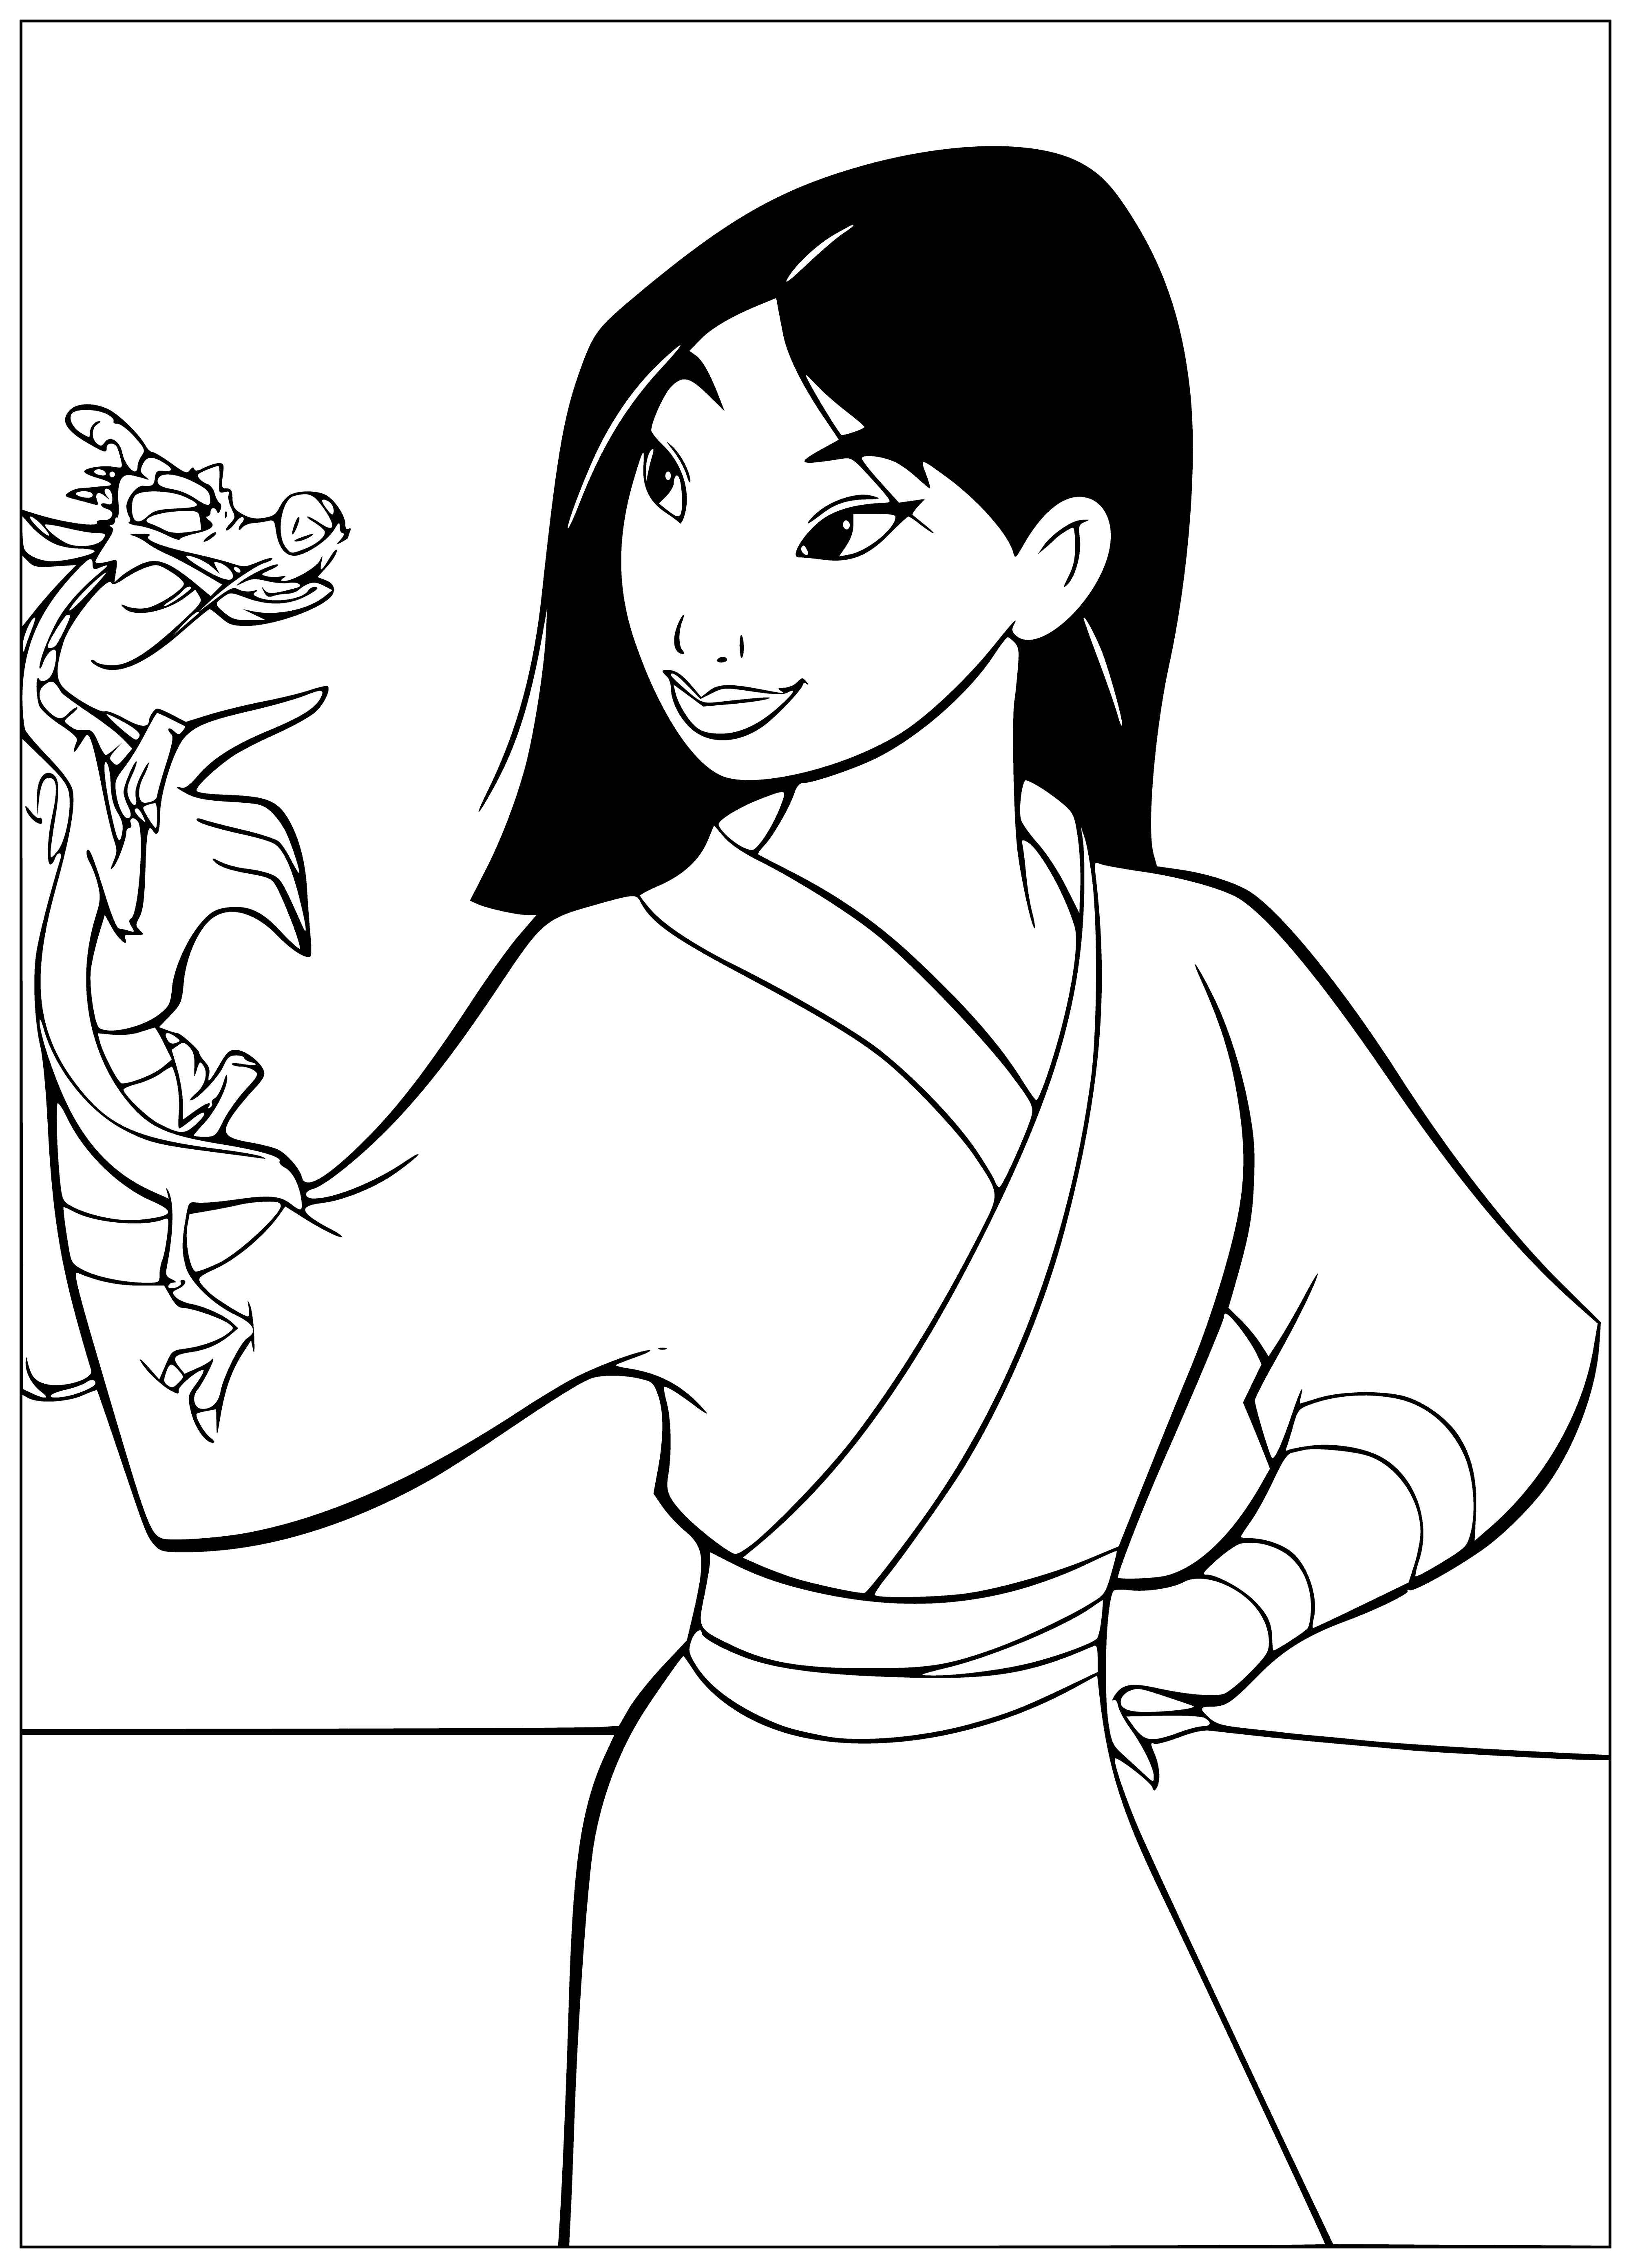 coloring page: Mulan and Mushu stand outside a large building, both serious, with Mushu holding a bag.